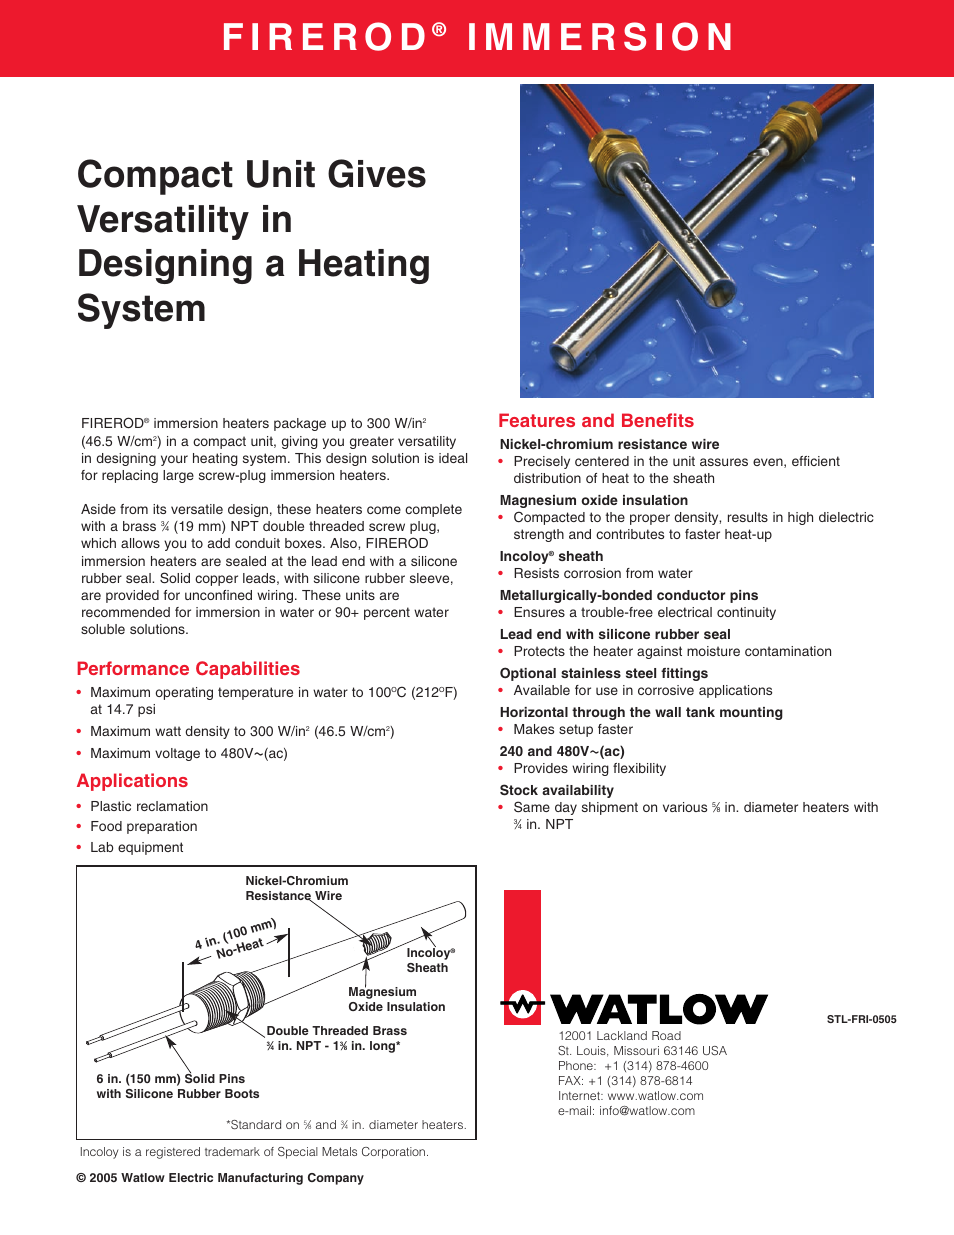 Watlow Electric Firerod Immersion User Manual | 2 pages